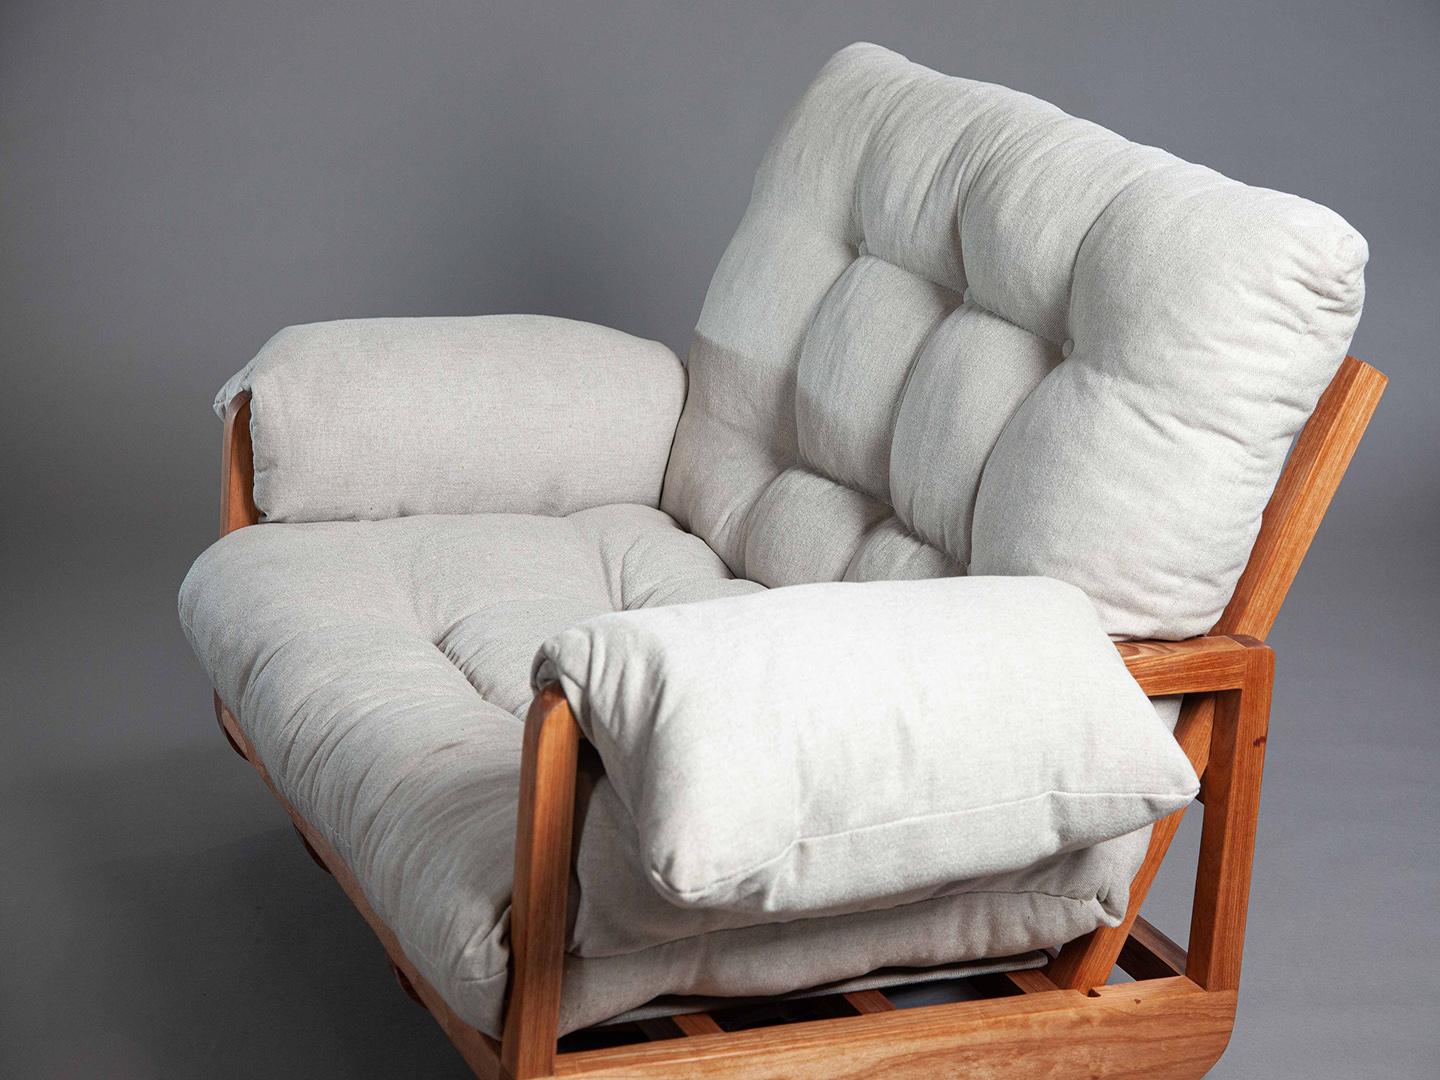 Hand-Crafted The Laziness Armchair. Rocking sofa in solid wood, upholstered in linen. For Sale